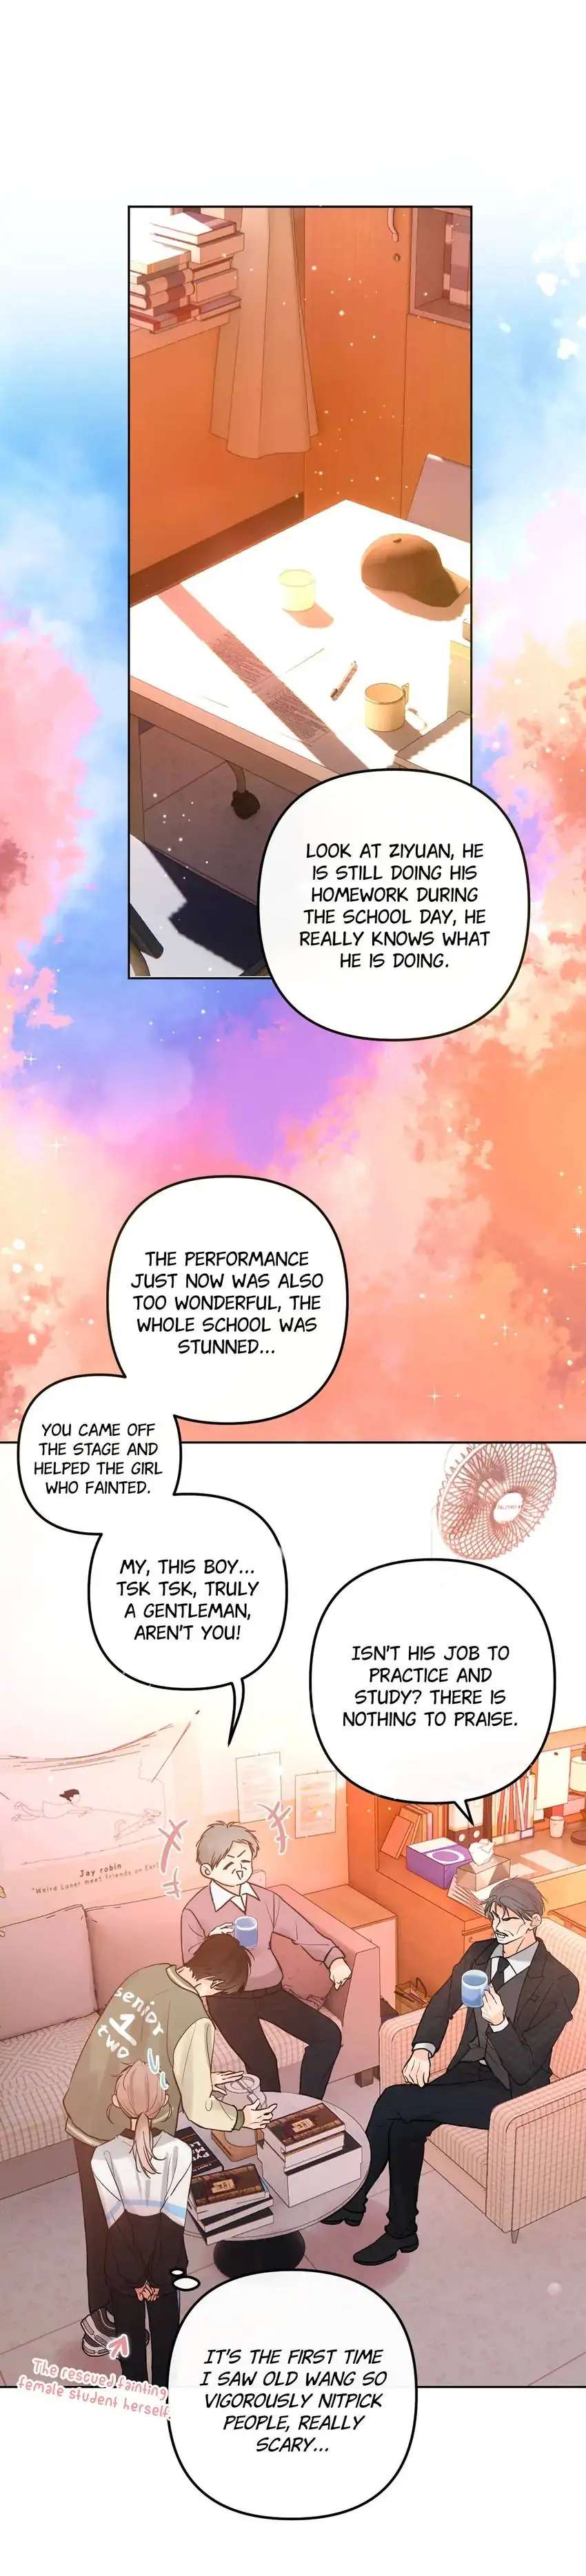 (So What If) This Is Just Life - Page 2